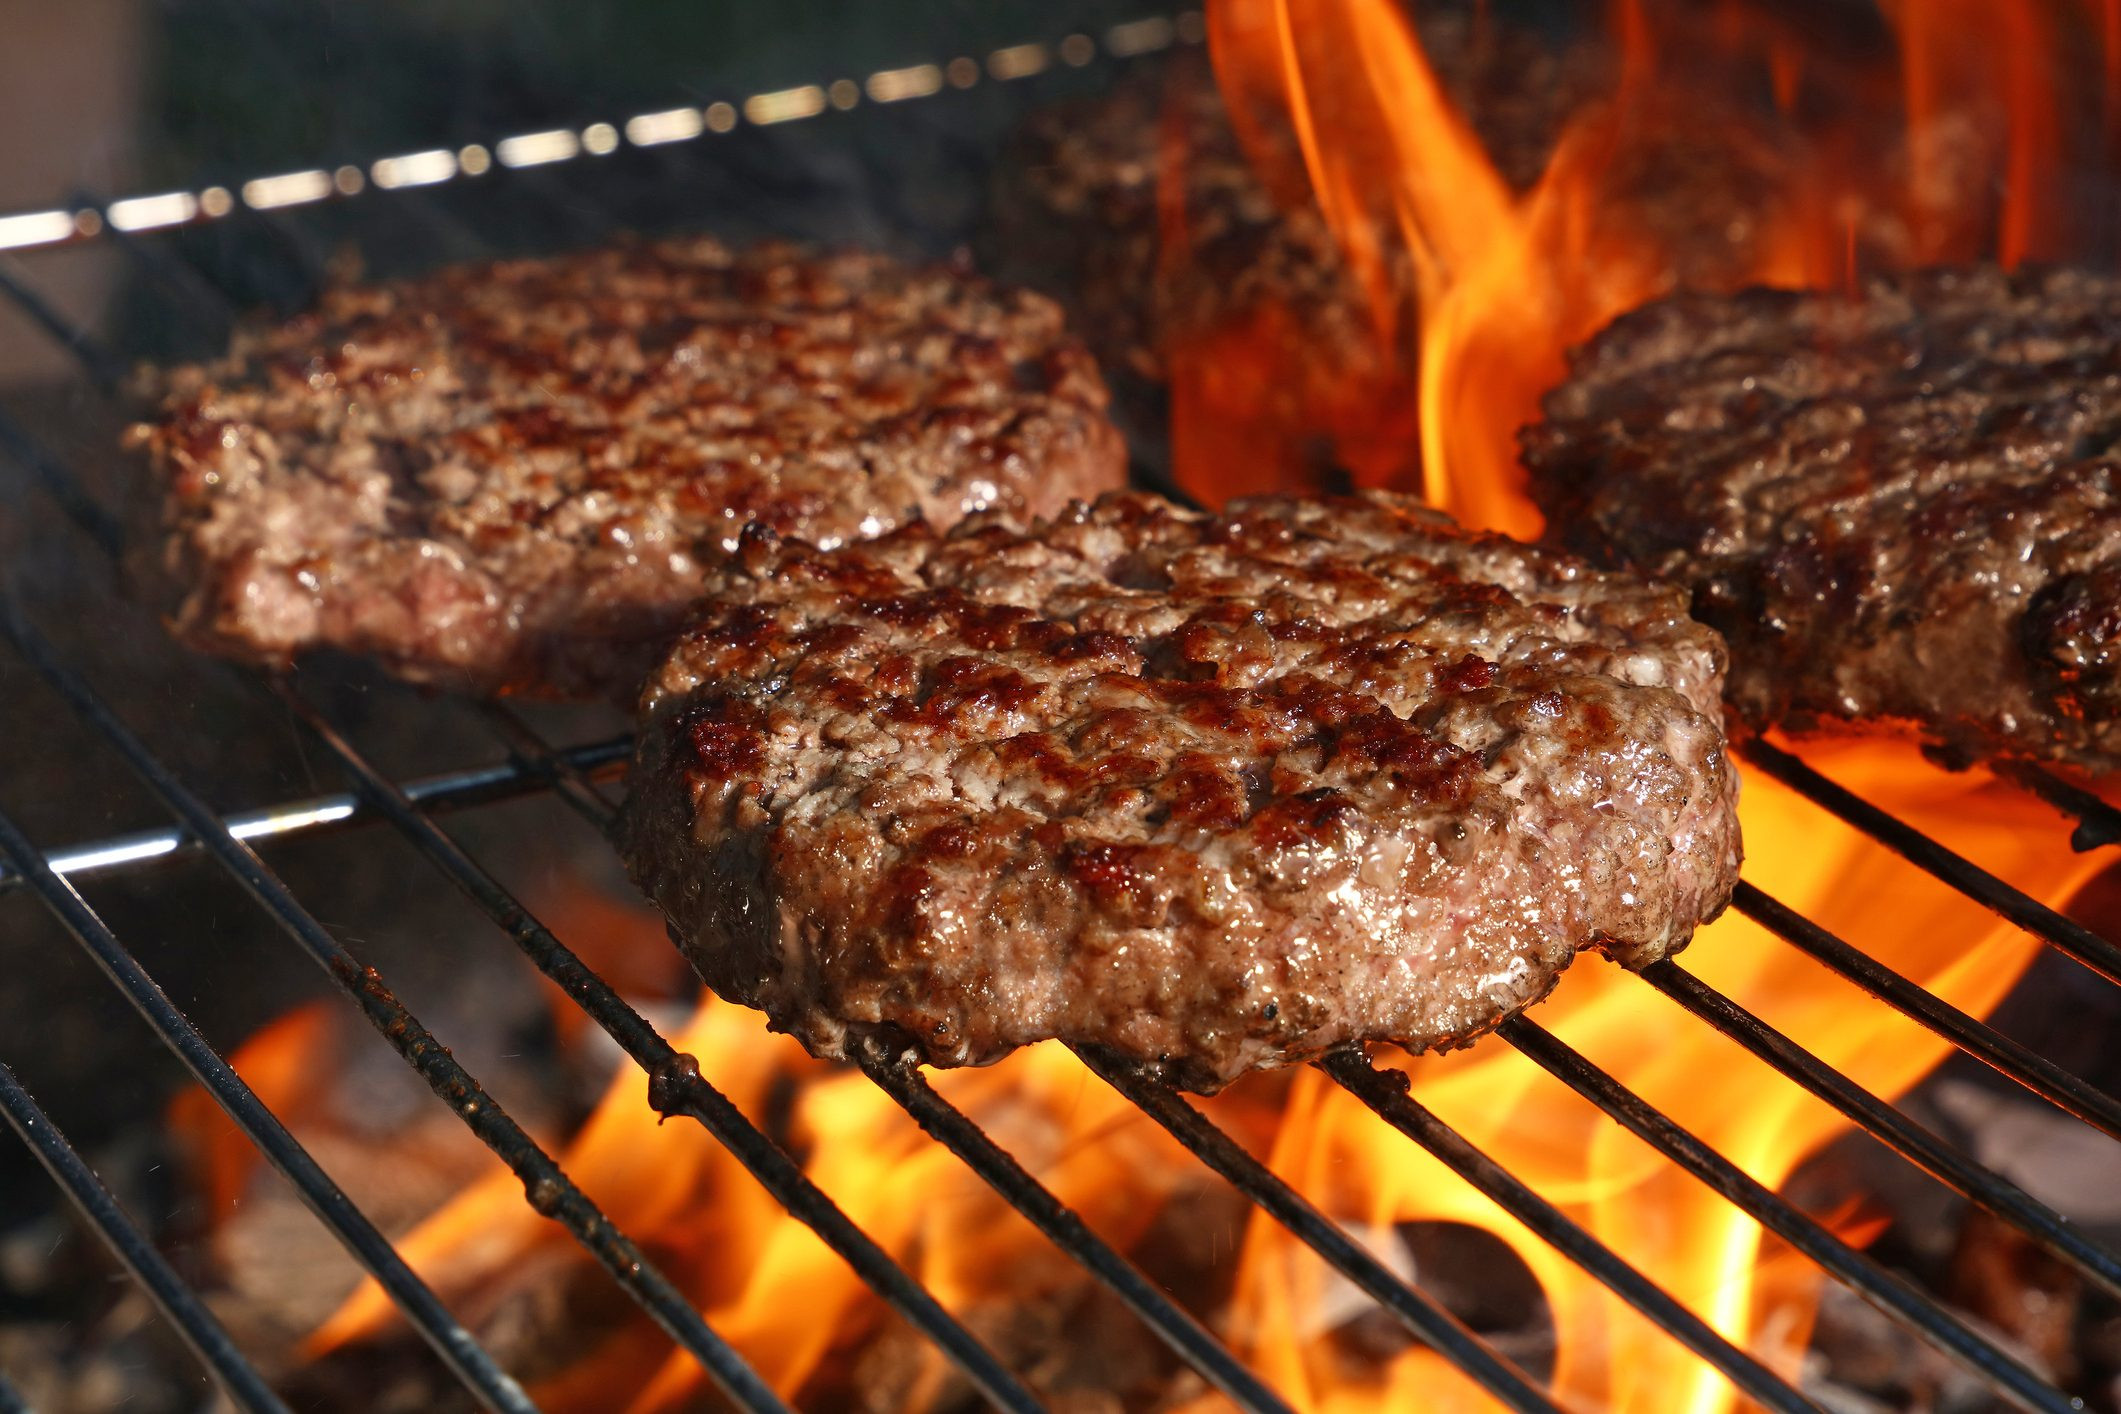 Cooking Hamburgers On the Grill Inspirational 10 Mistakes to Avoid while Grilling Burger Patties